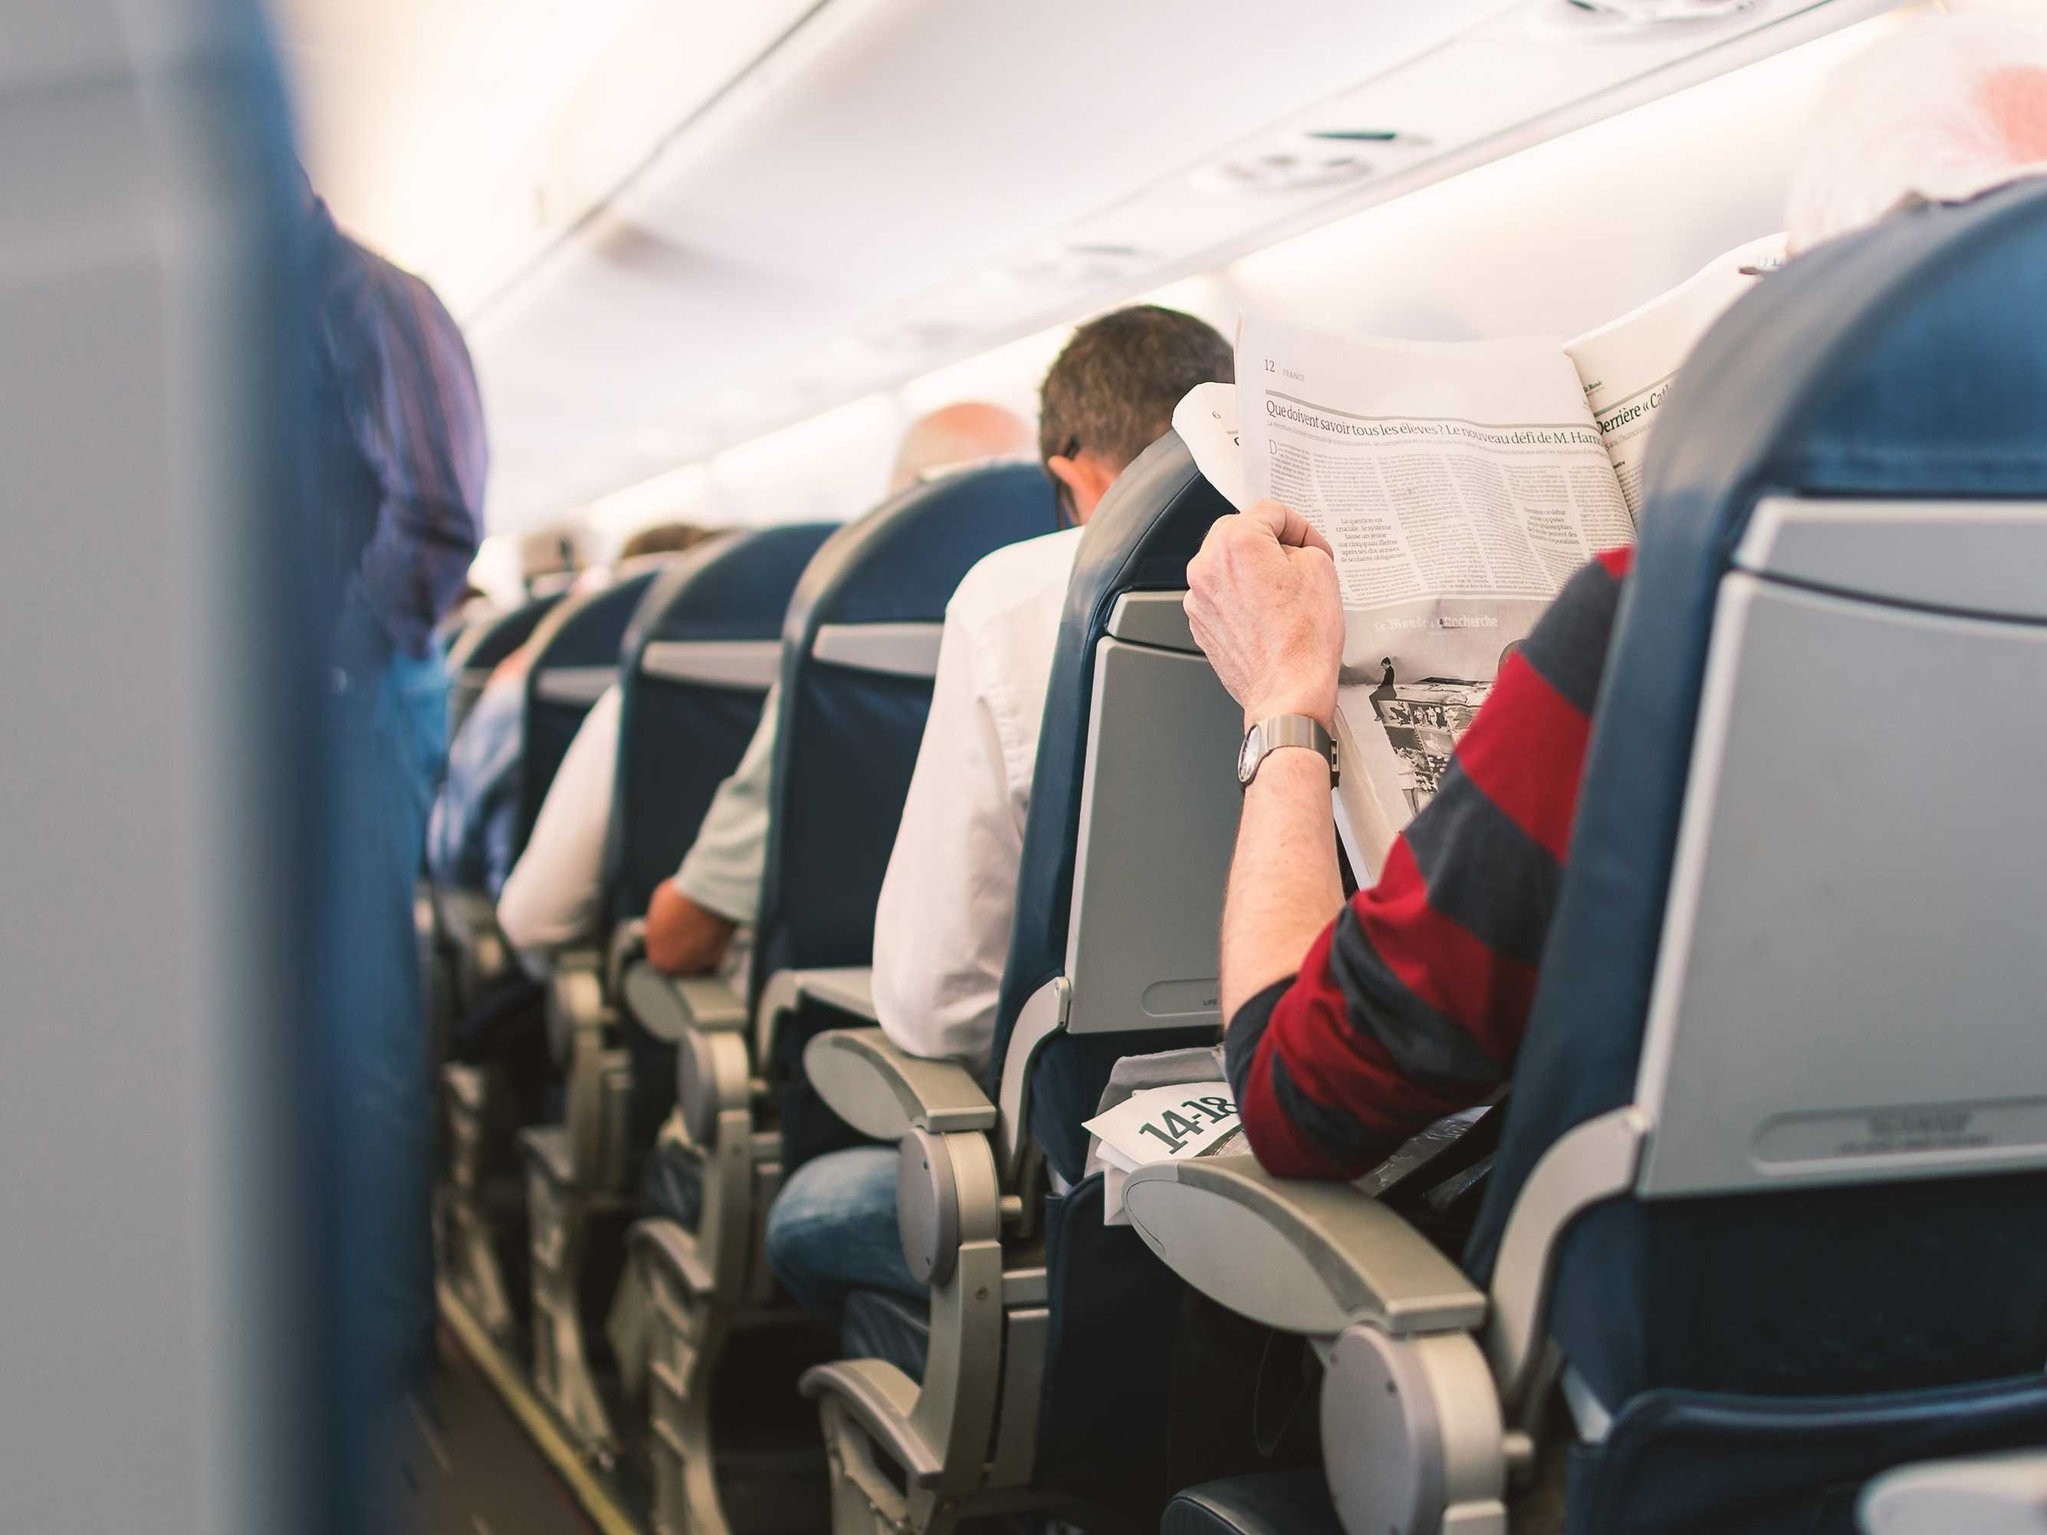 Back pain caused by sitting still for a long time is one of the most frequently reported inconveniences of air travel.